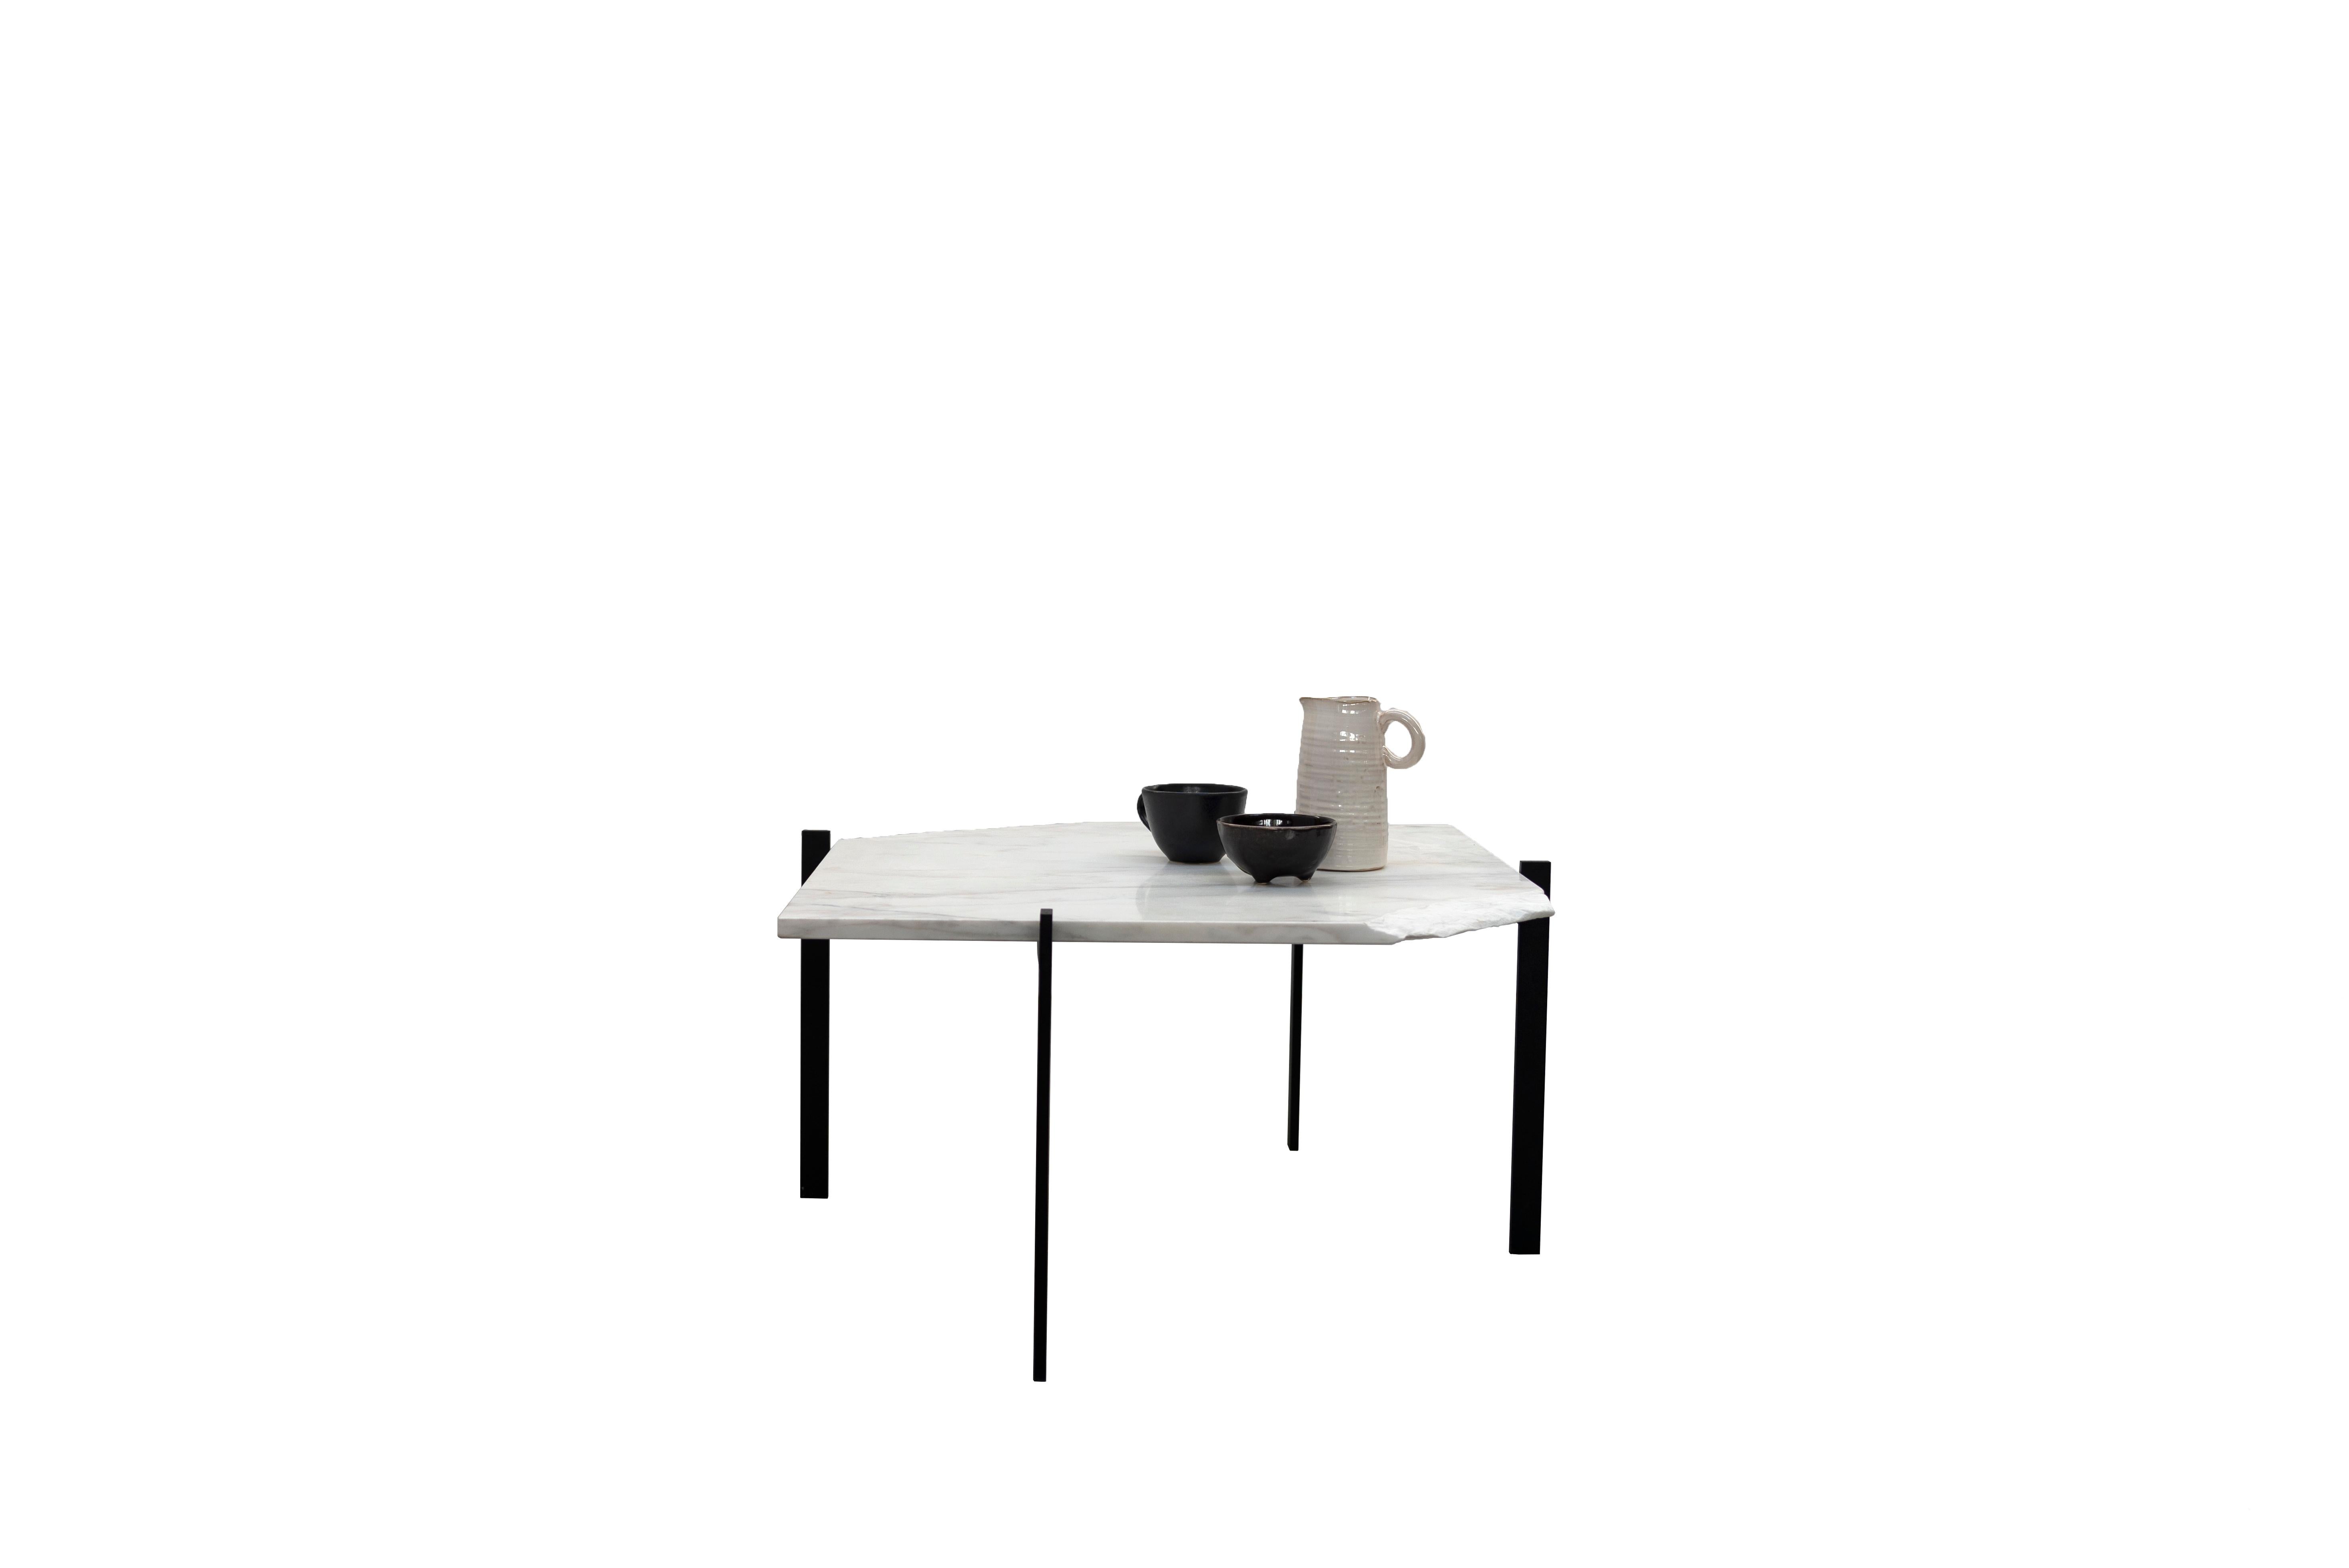 Object 018 center table by NG Design
Dimensions: D77 x W77 x H40 cm
Materials: Powder coated steel, Marble Bianco Ibiza

Also Available: All of objects available in different materials and colors on demand.

Do you like breaking convention?